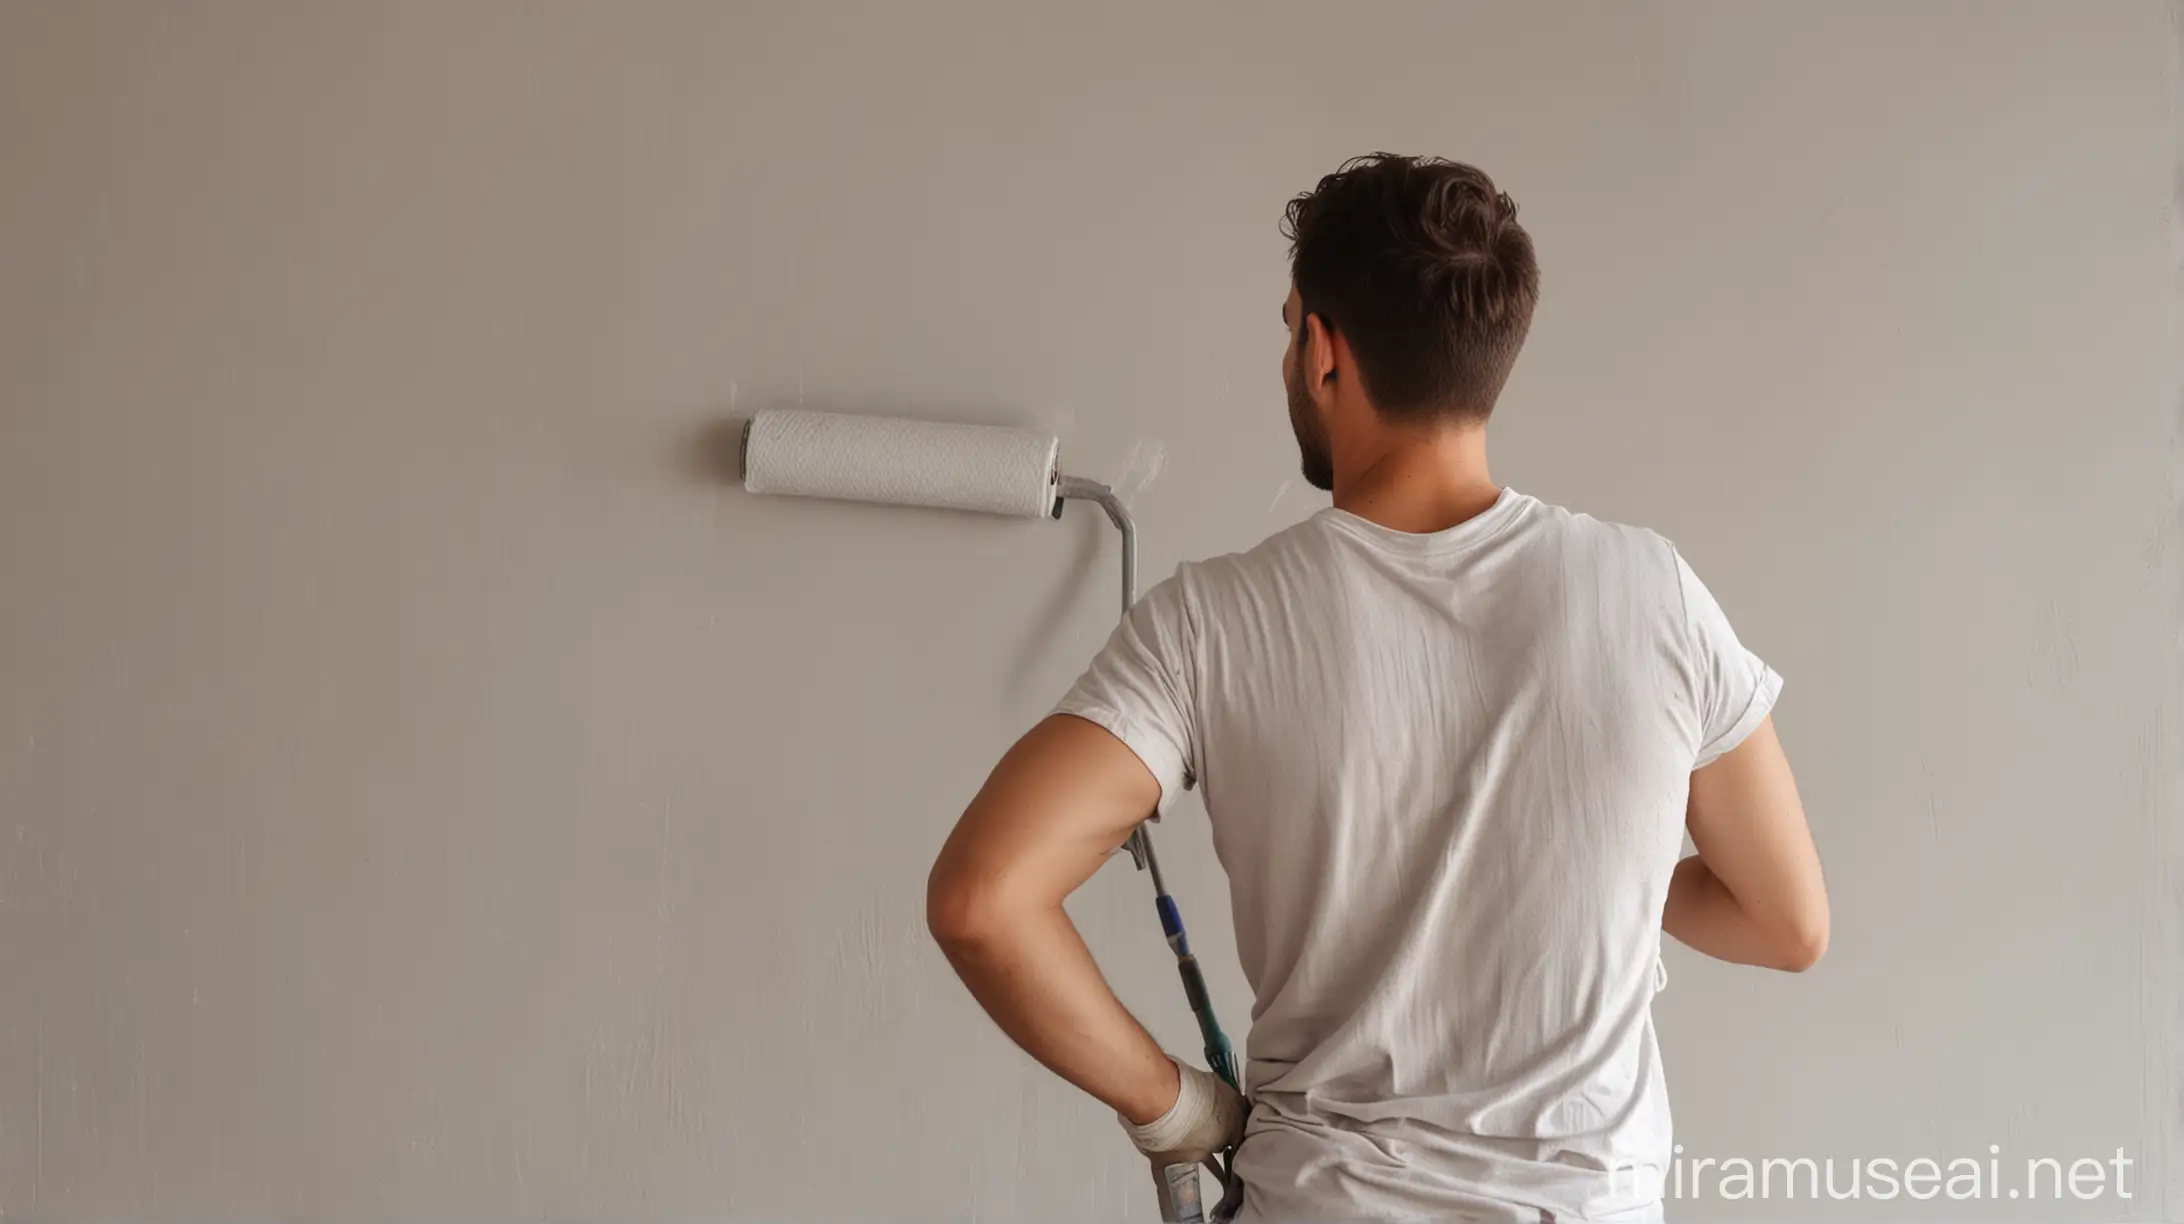 Painter Painting Wall with Roller